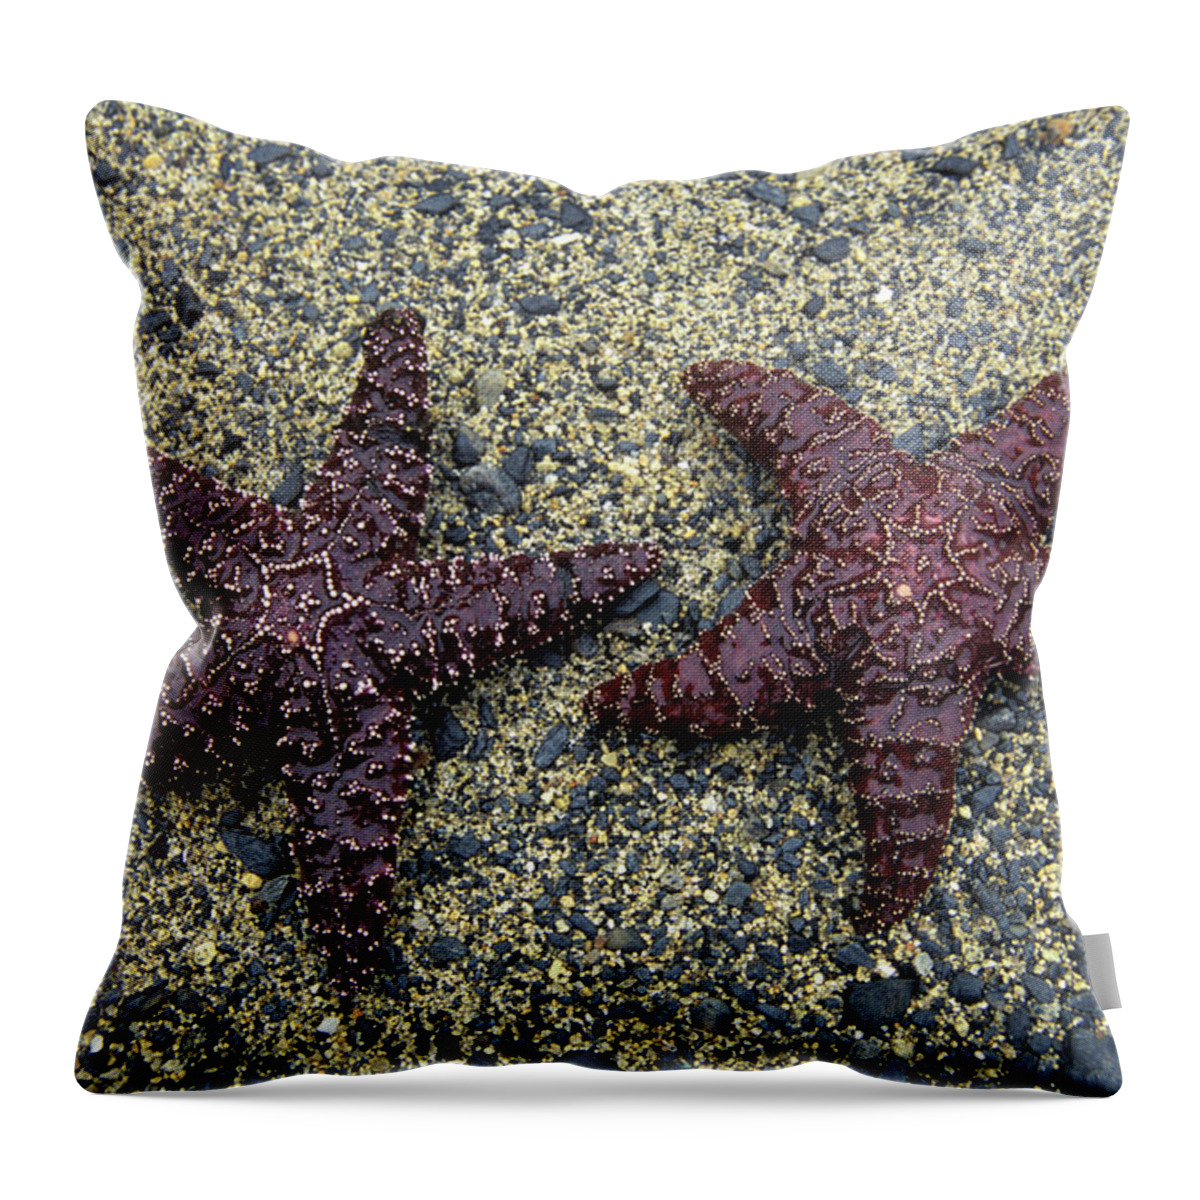 Photography Throw Pillow featuring the photograph Ketchikan Alaska Starfish In Settlers by Animal Images